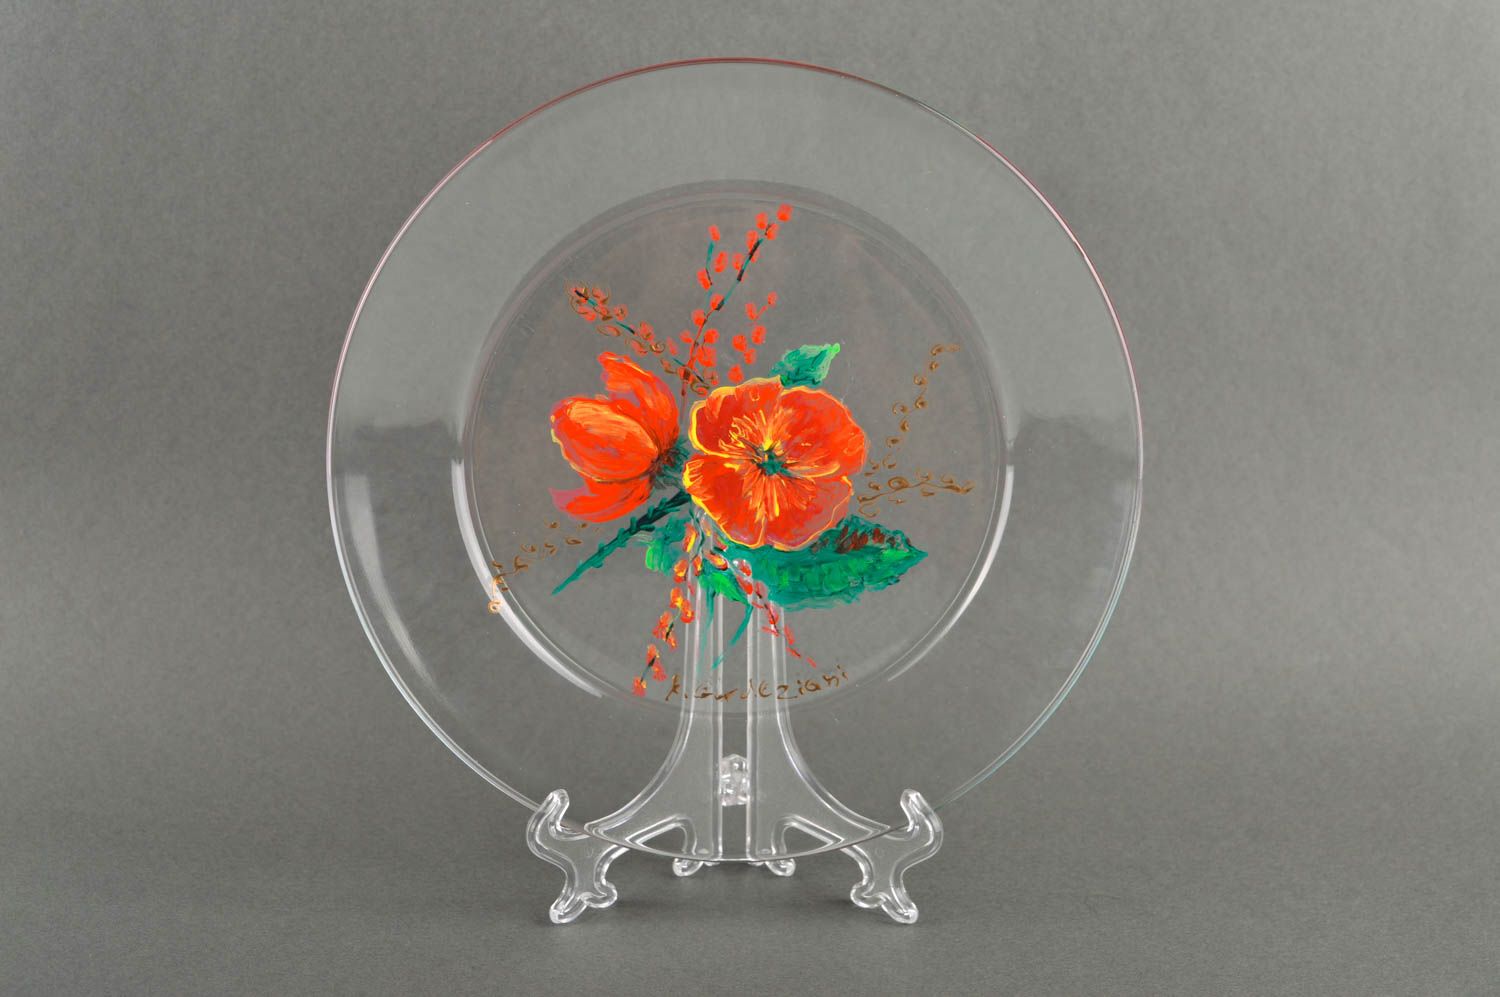 Unusual handmade glass plate table decor ideas cool rooms decorative use only photo 2